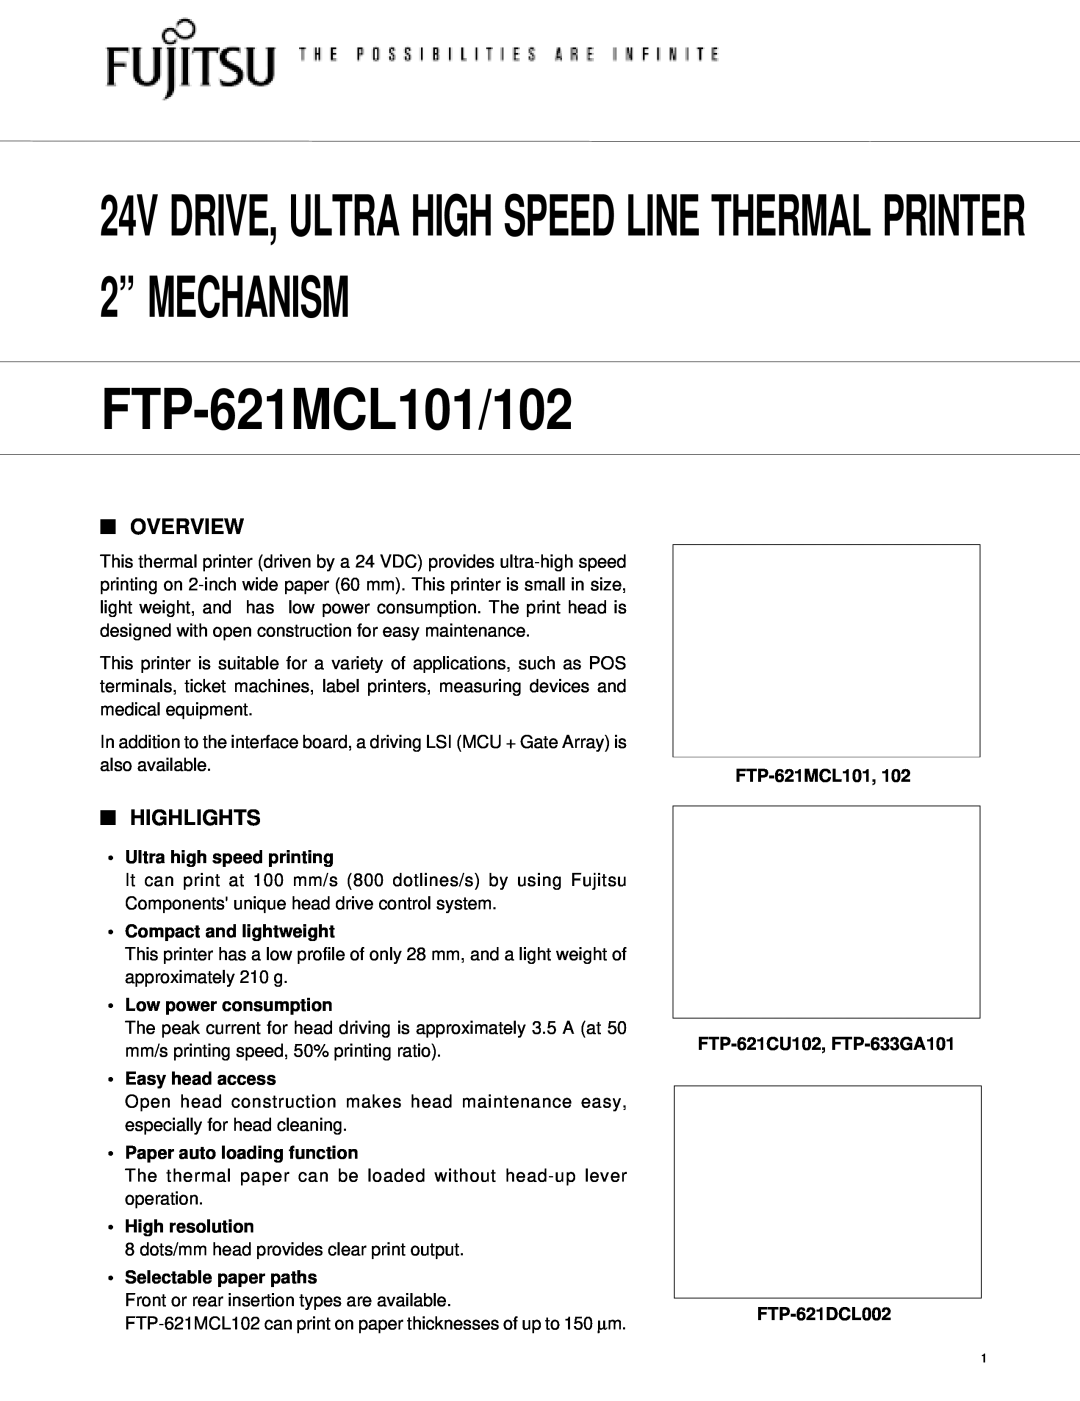 Fujitsu FTP-621DCL002 manual Overview, Highlights, FTP-621MCL101, Ultra high speed printing, Compact and lightweight 